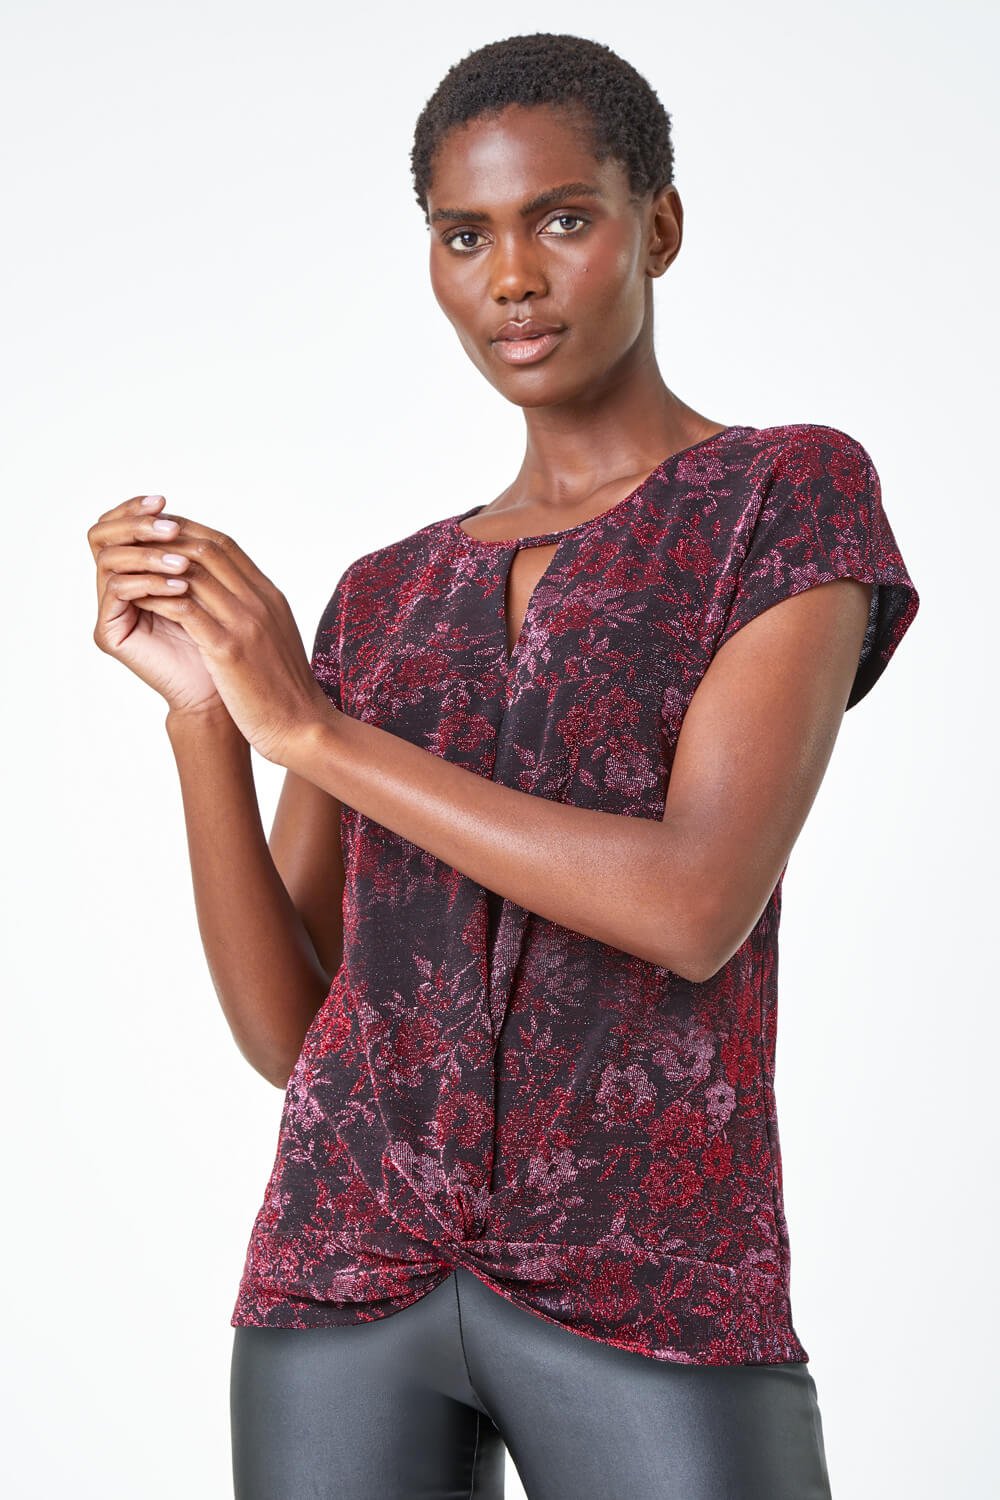 PINK Floral Shimmer Print Knot Stretch Top, Image 2 of 5